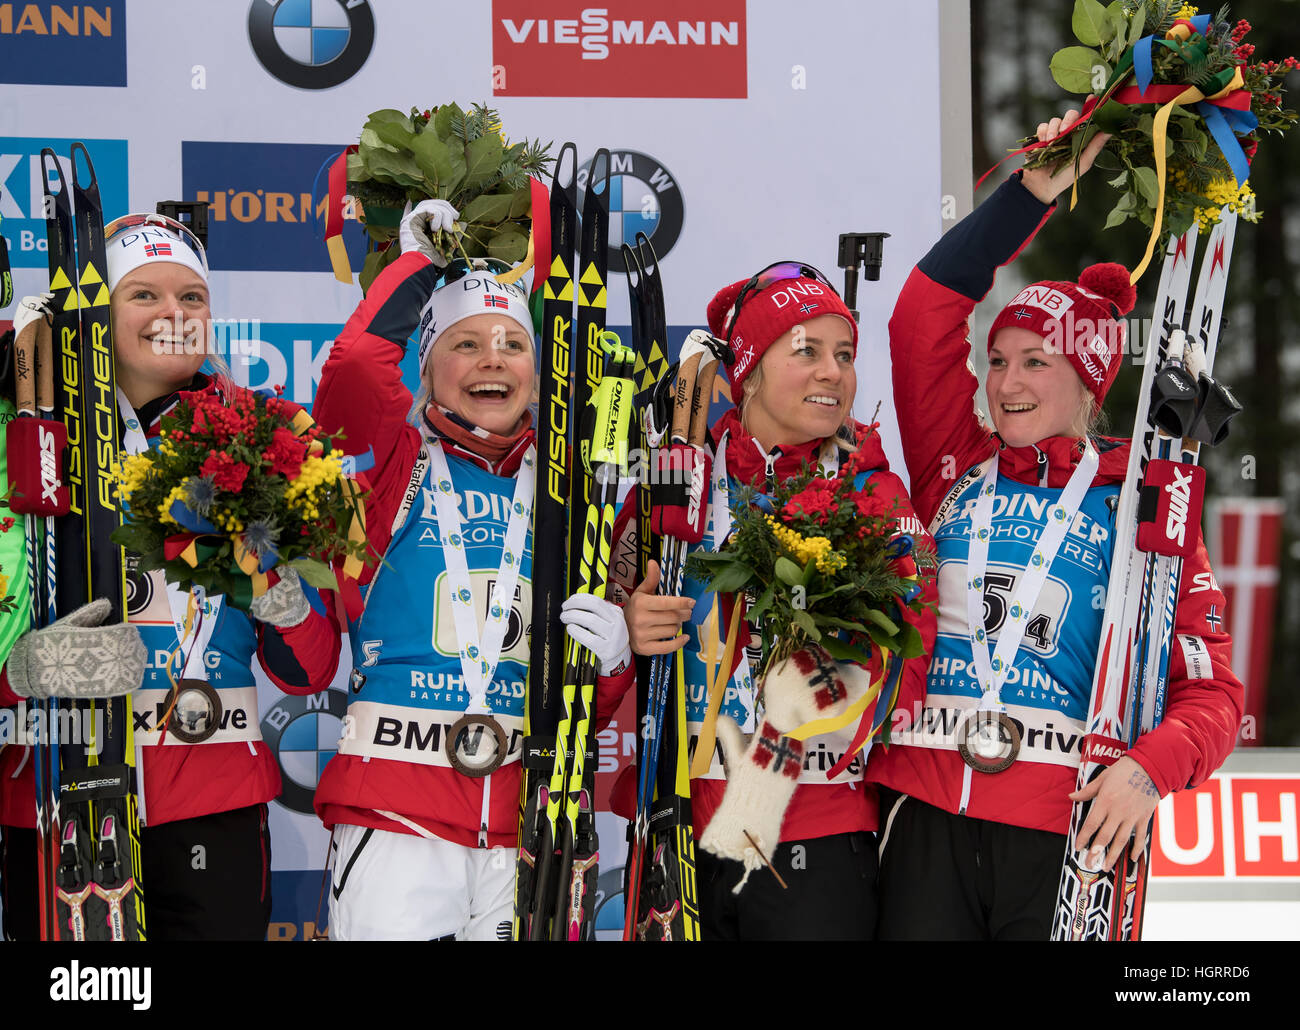 Ruhpolding, Germany. 12th Jan, 2017. L-R: Norwegian biathletes Kaia Woeien Nicolaisen, Hilde Fenne, Tiril Eckhoff and Marte Olsbu on the victors' podium after competing in the 4 x 6 kilometer women's relay race at the Biathlon World Cup in the Chiemgau Arena in Ruhpolding, Germany, 12 January 2017. Germany finished in first place ahead of France and Norway. Photo: Matthias Balk/dpa/Alamy Live News Stock Photo